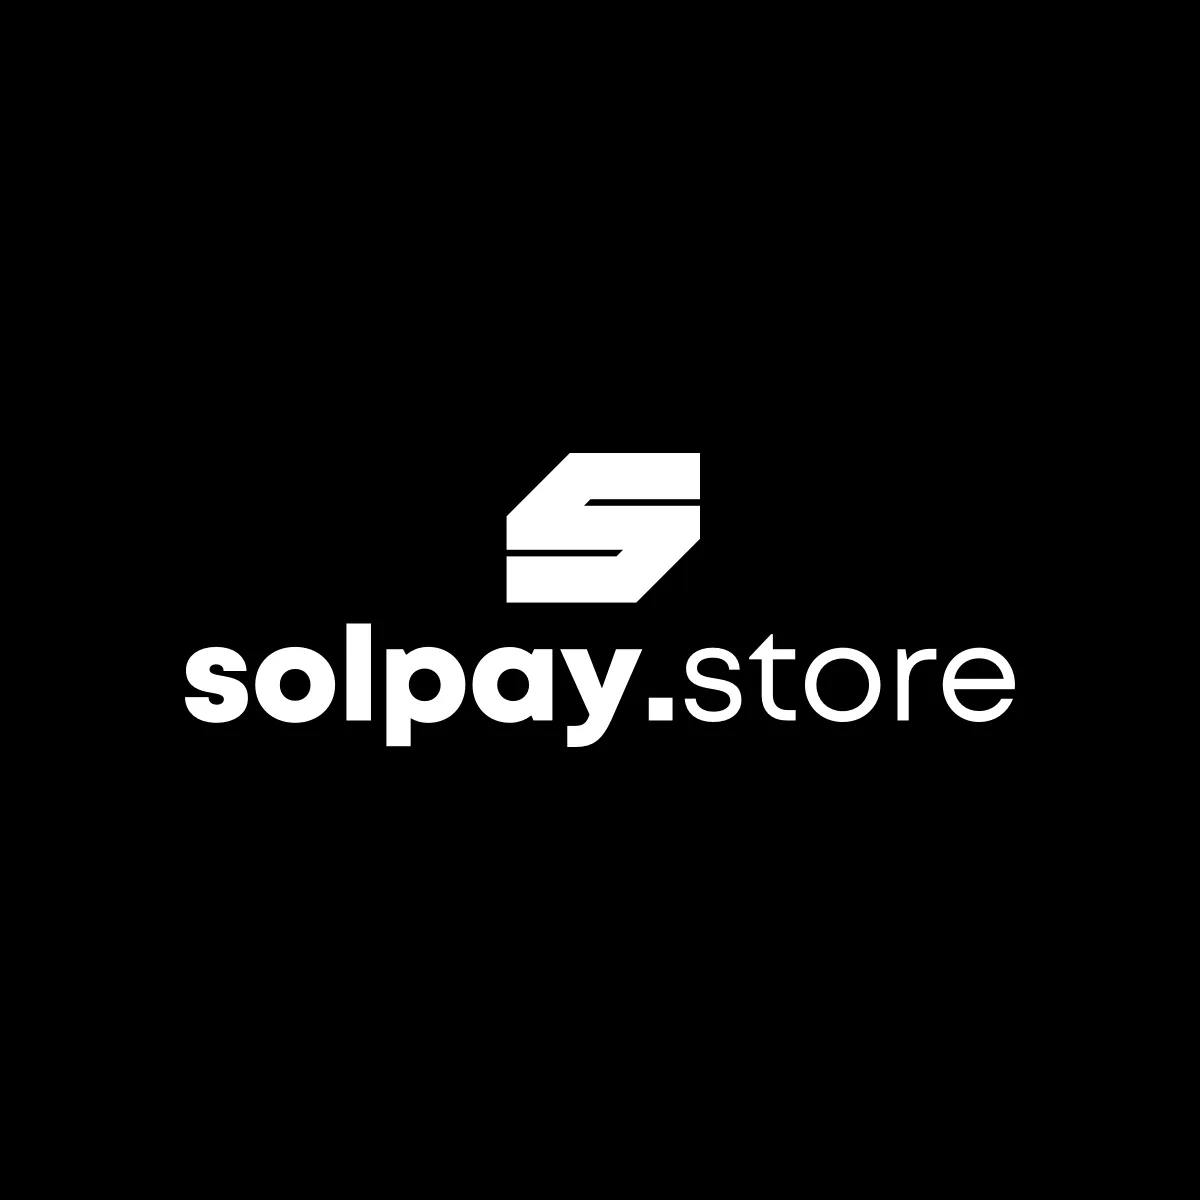 solpay.store